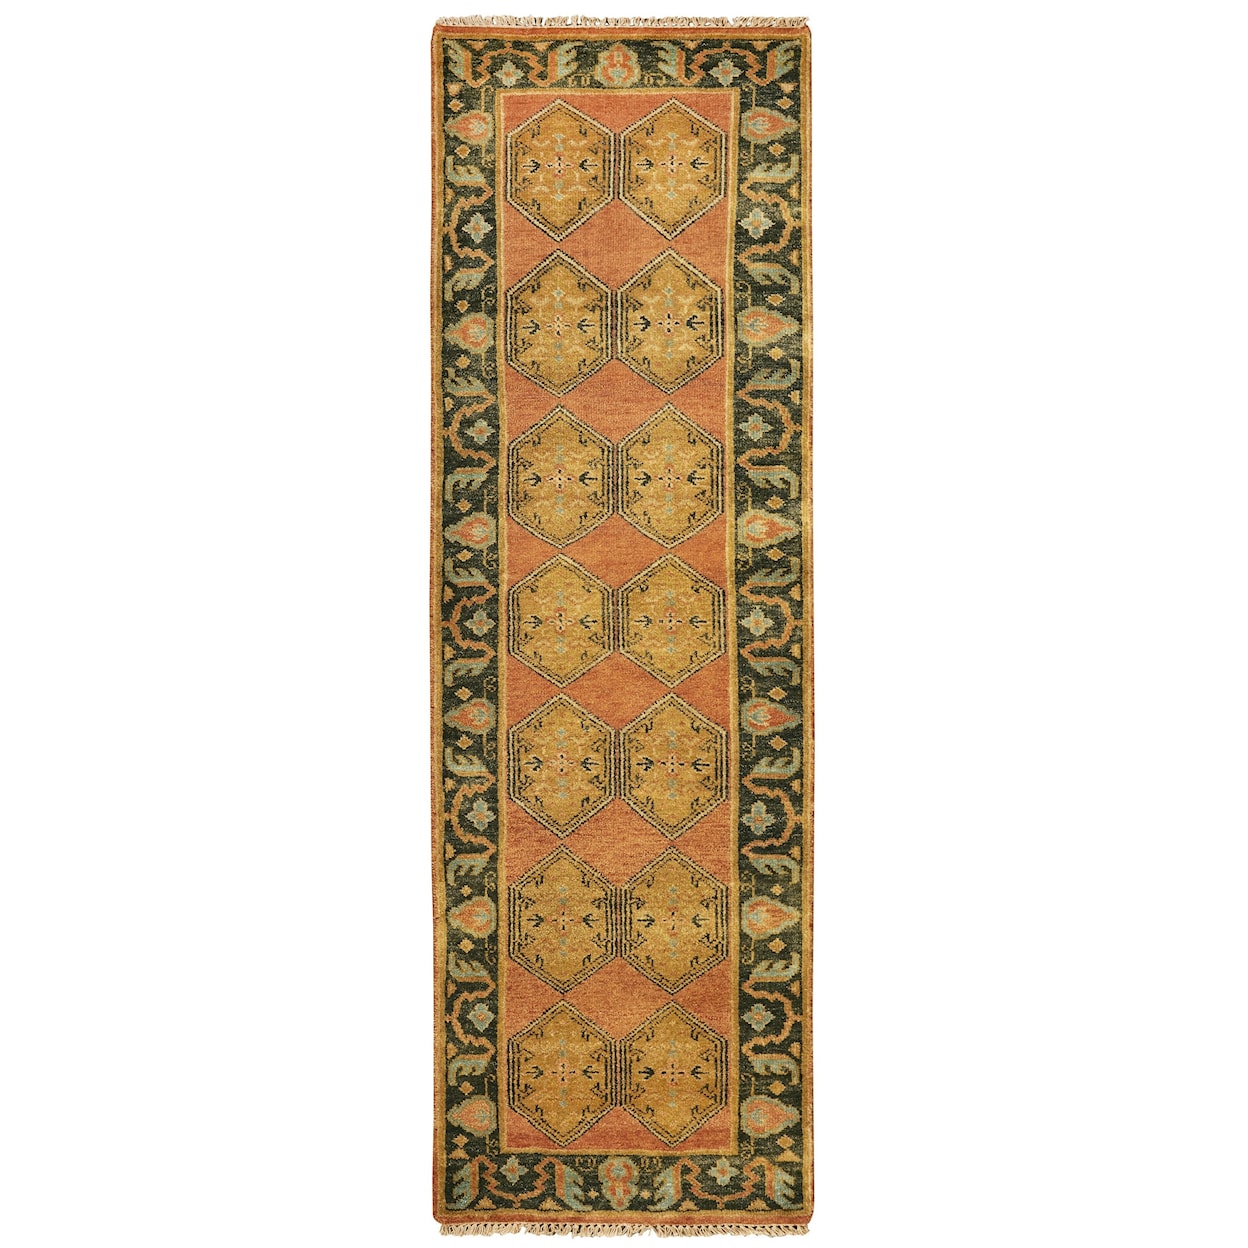 Feizy Rugs Ustad Rust/Charcoal 9'-6" x 13'-6" Area Rug